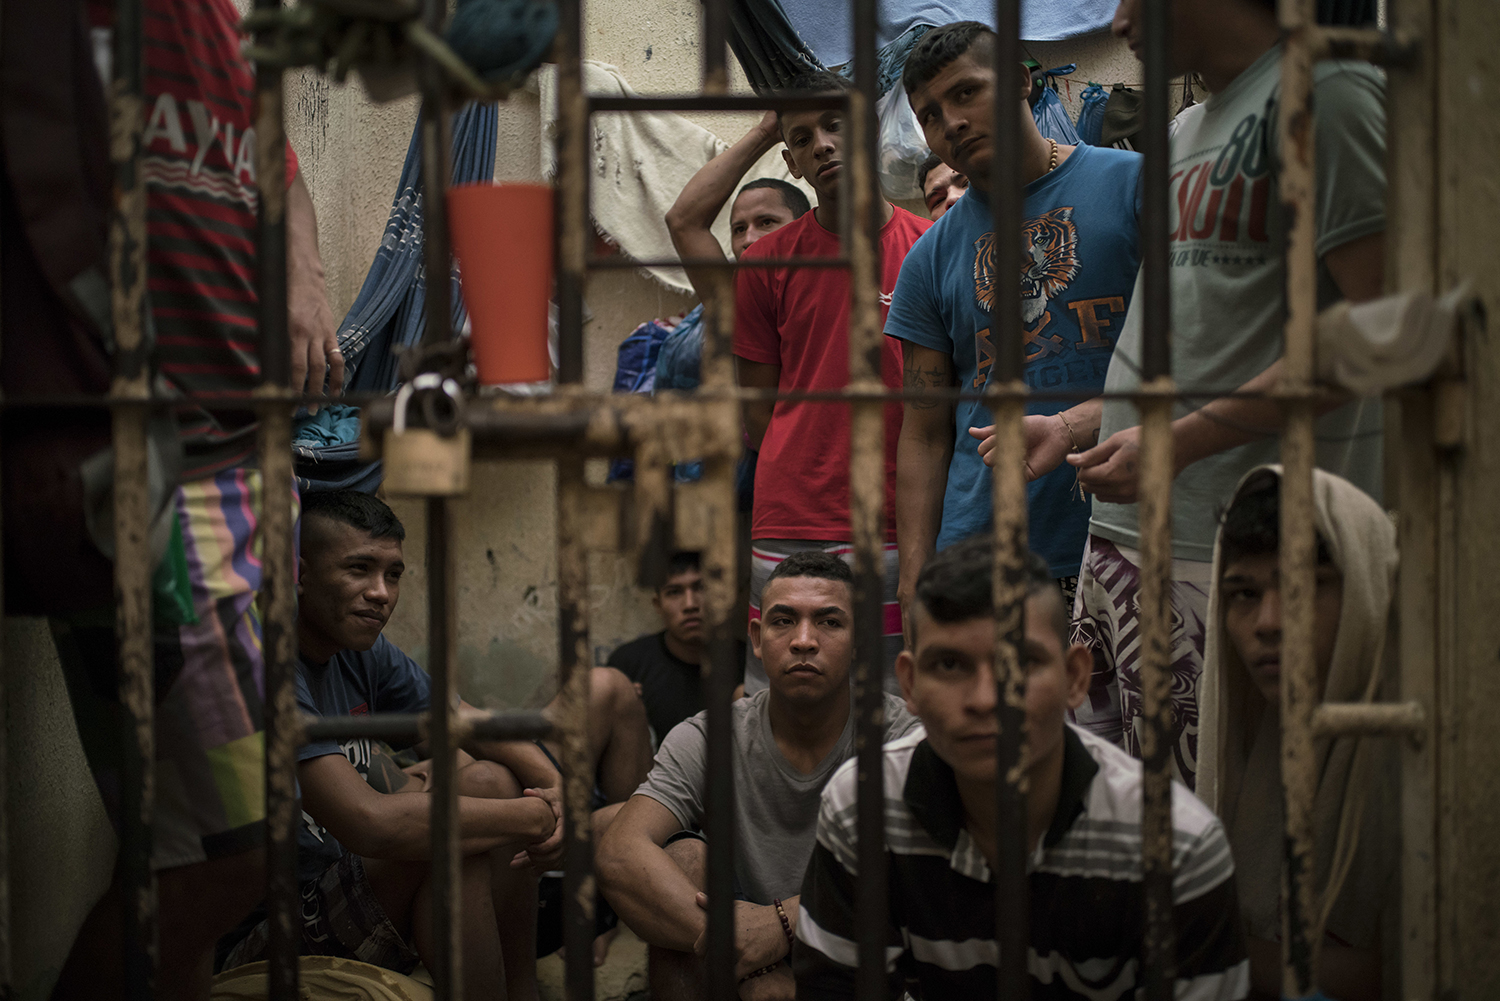 Brazil's crowded prisons feed gangs, violence — AP Images Spotlight